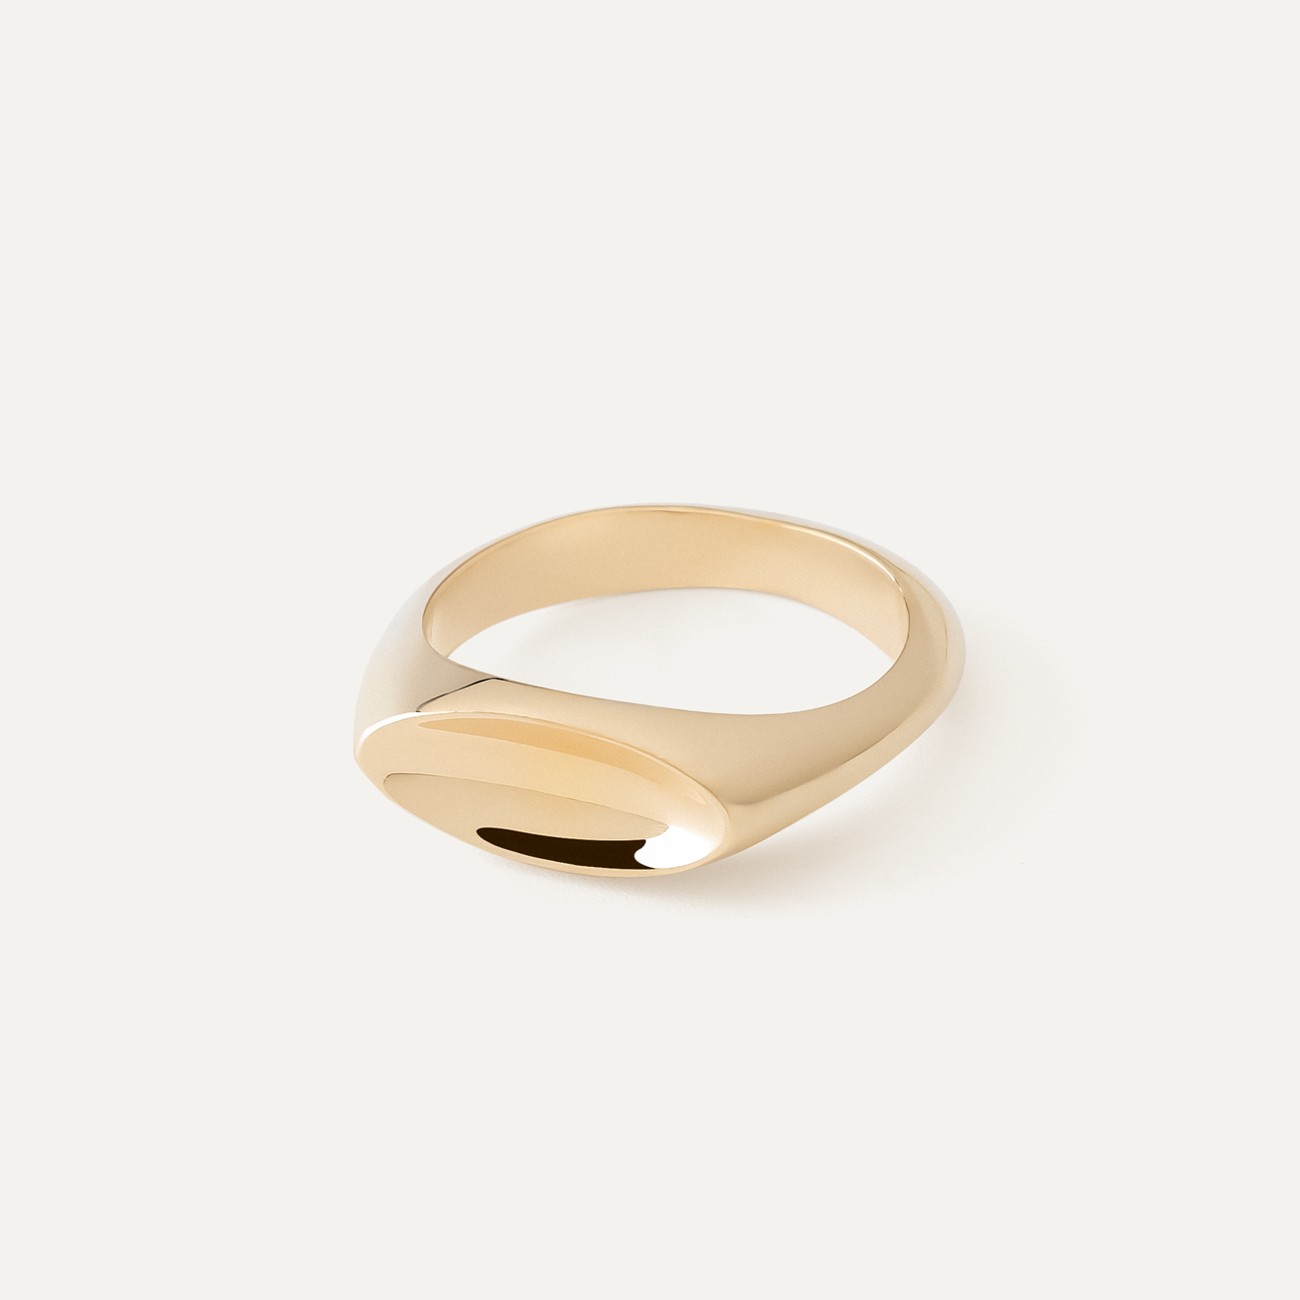 Wide ring, sterling silver 925, XENIA x GIORRE